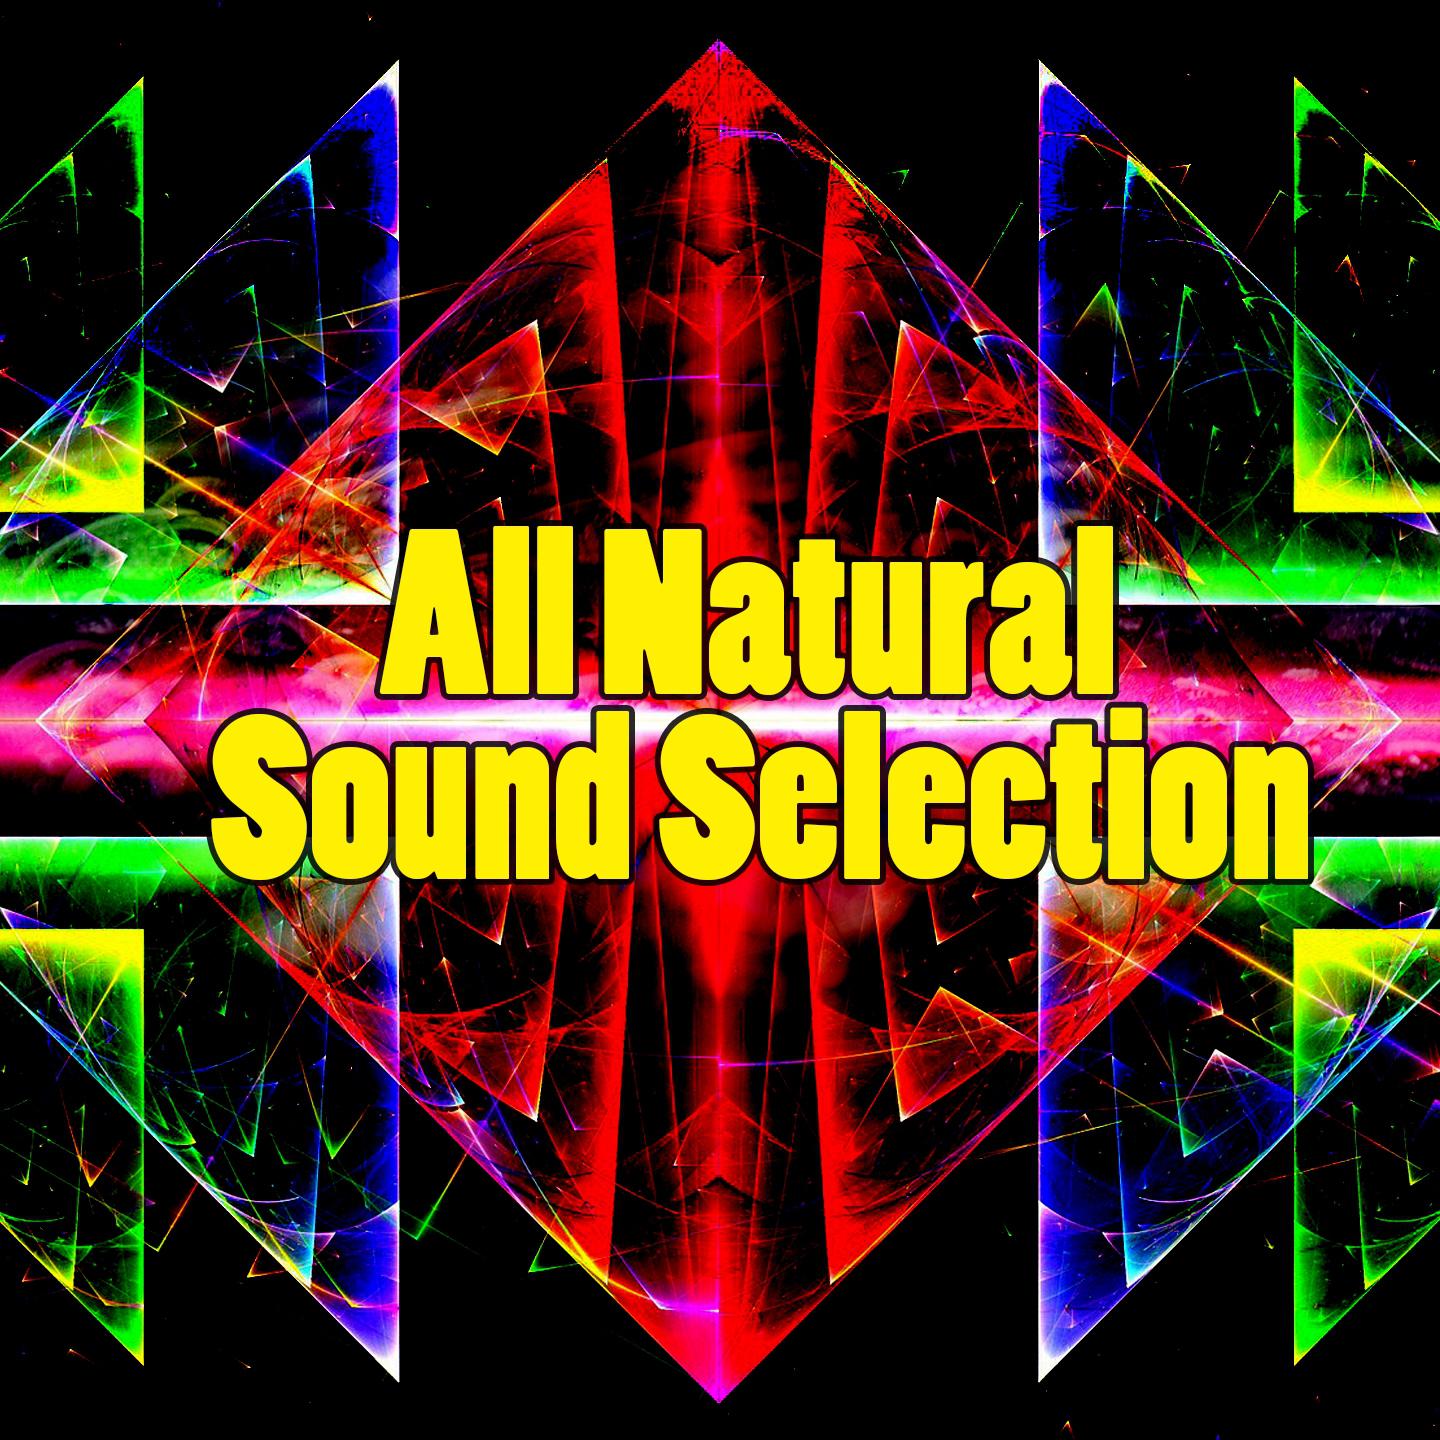 All Natural Sound Selection